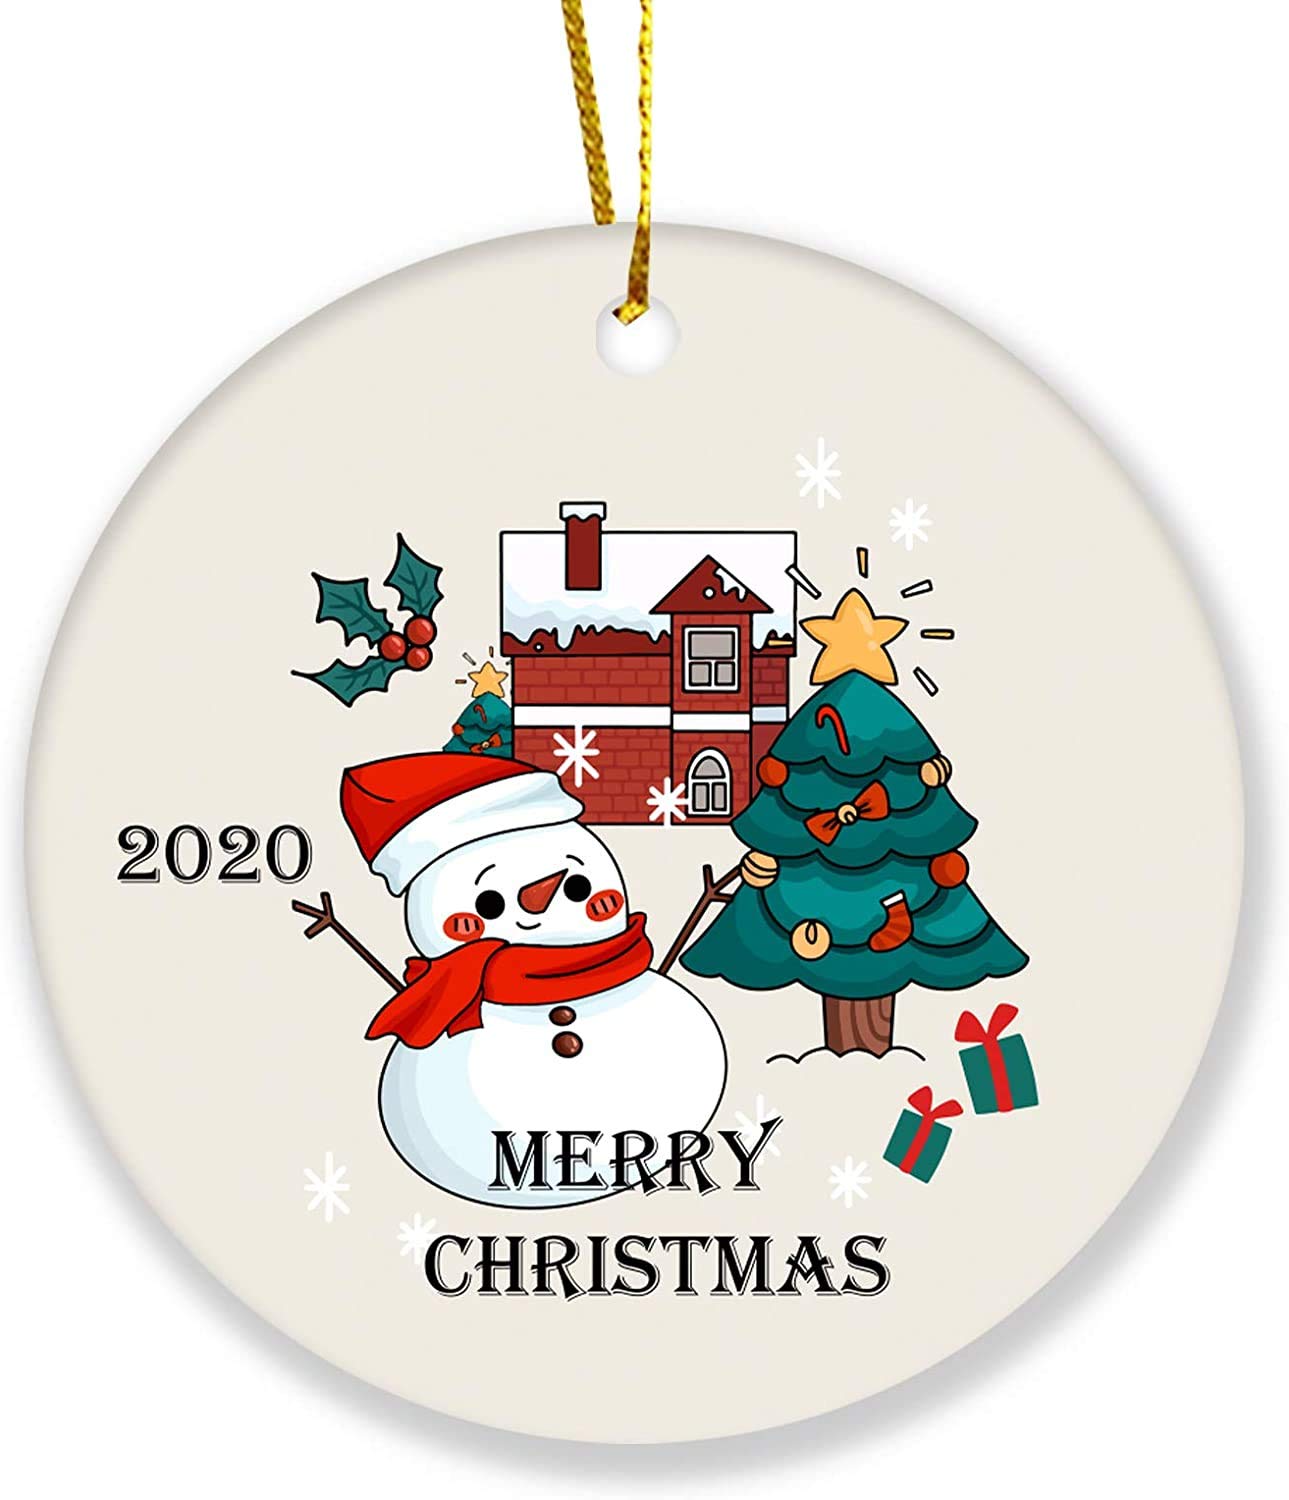 2020 Christmas Tree Ornament Merry Christmas Snowman Personalized Gifts